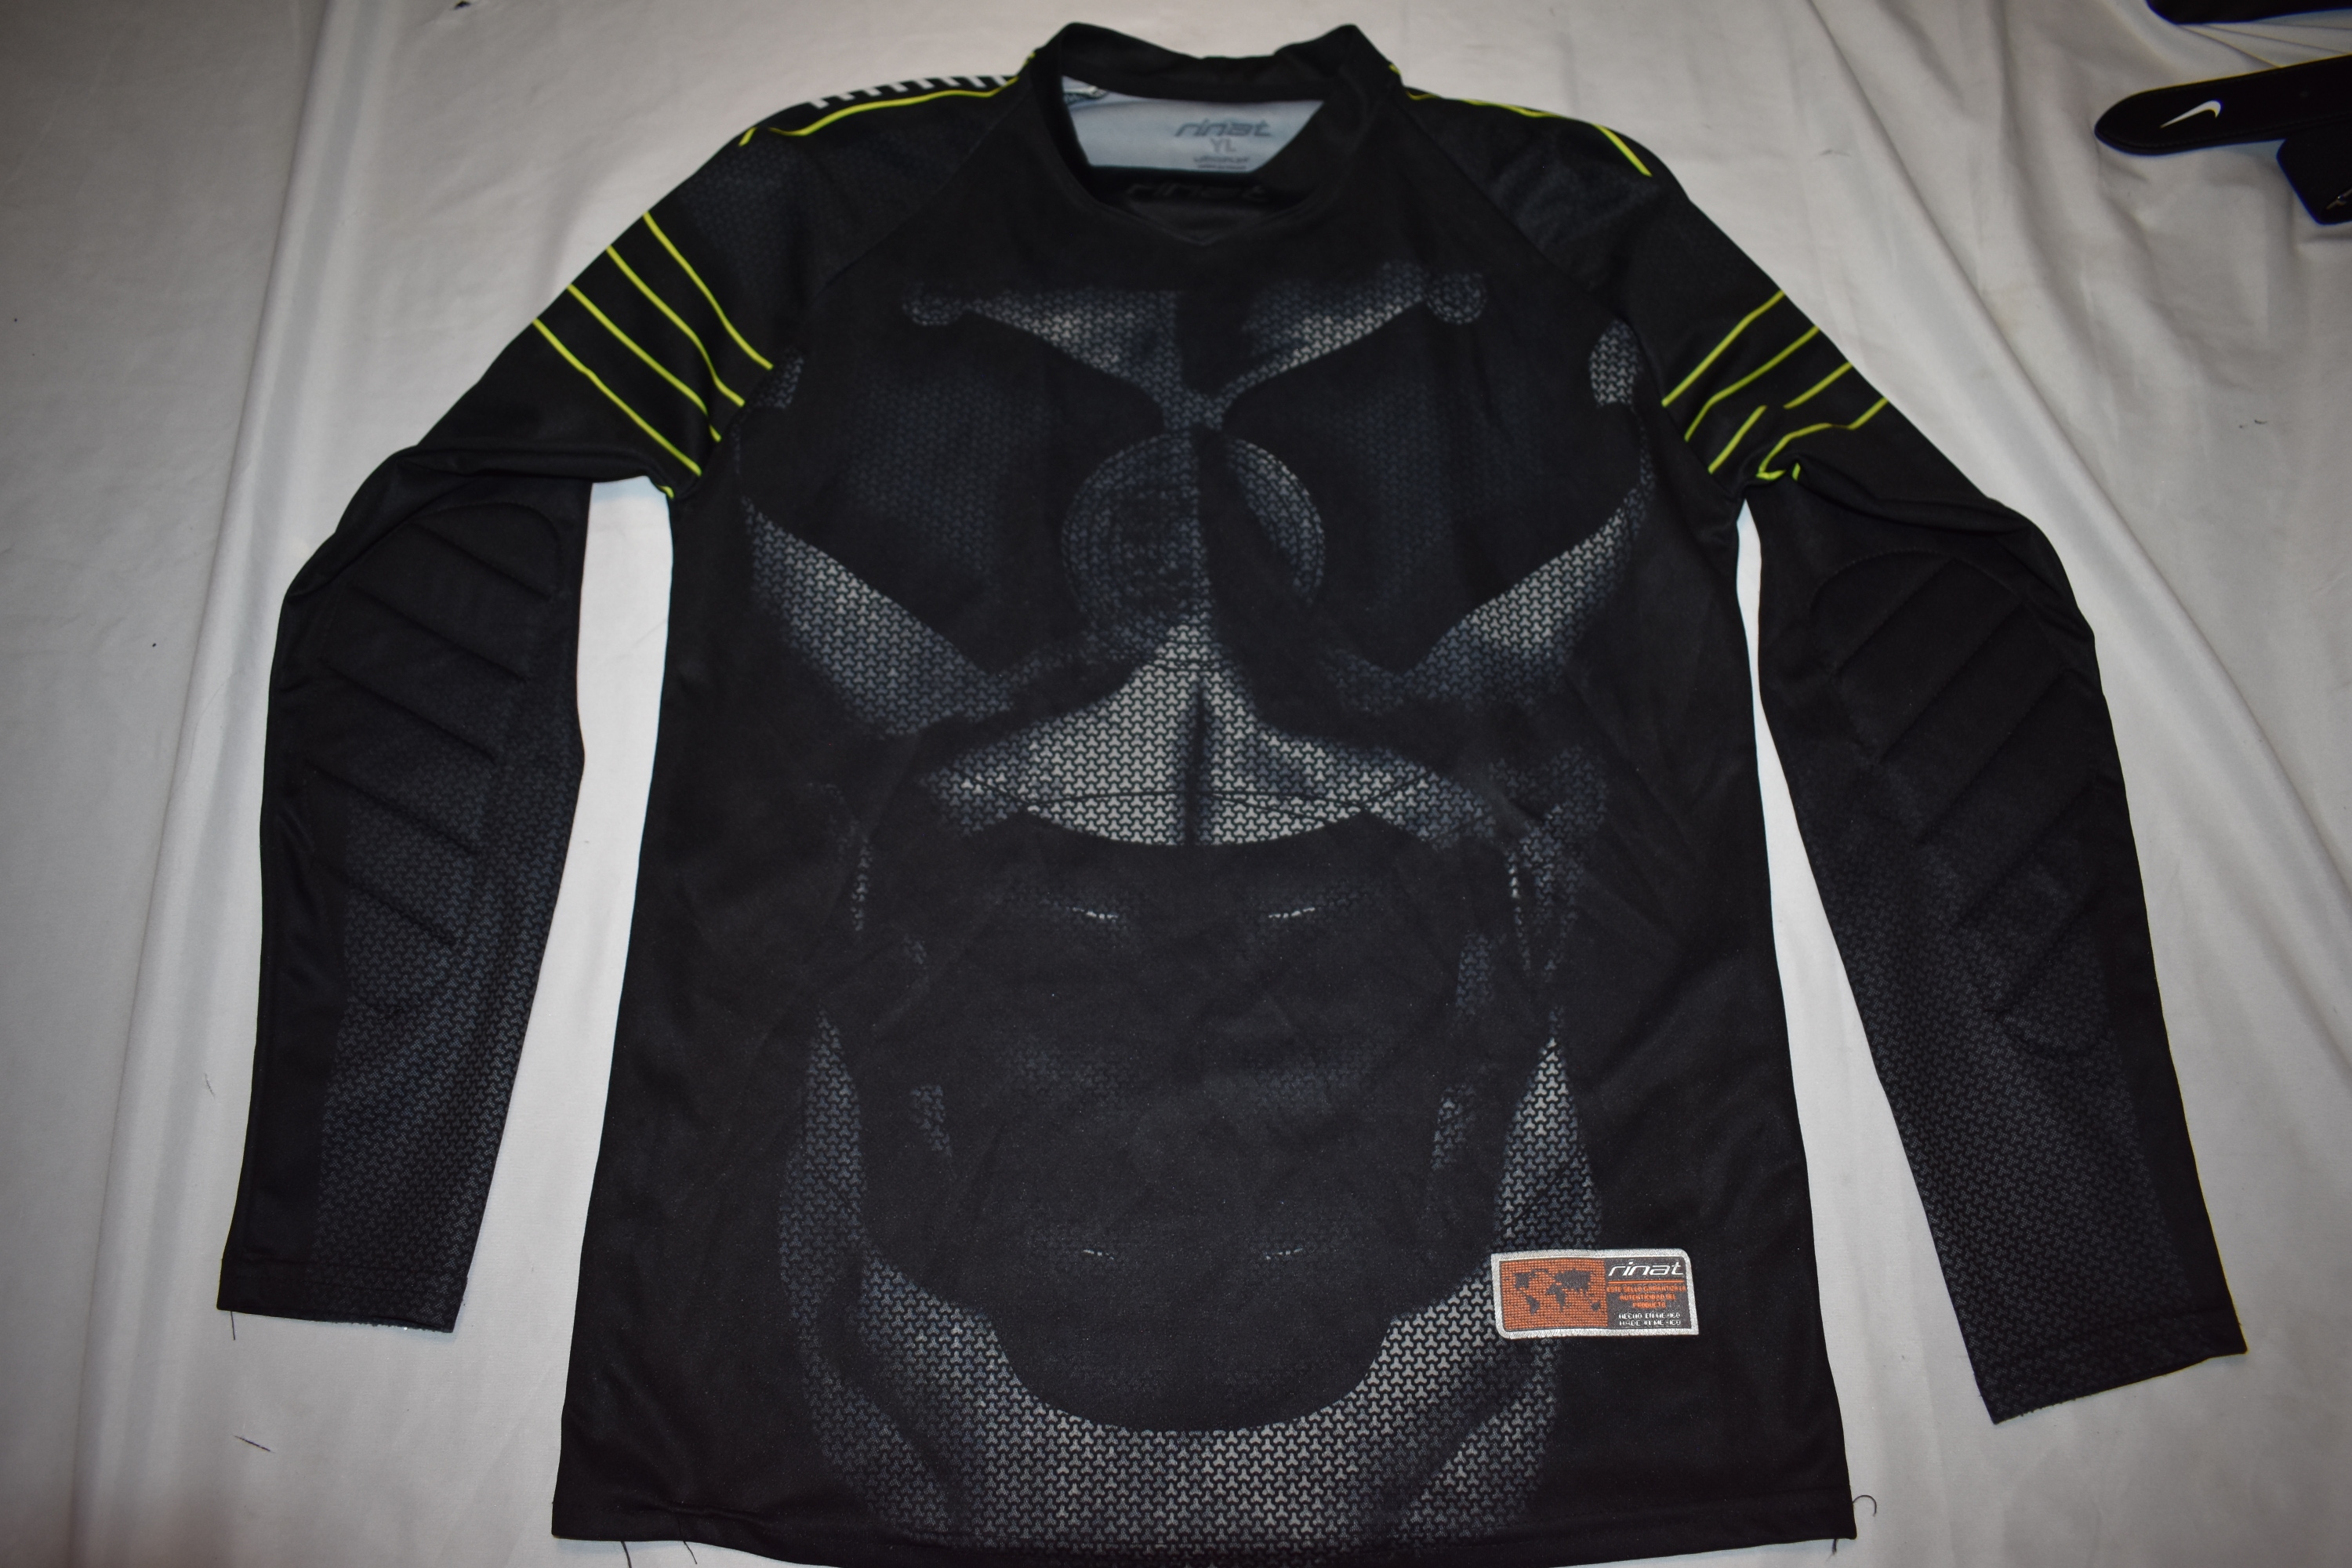 Rinat UltraPlay Soccer Goalie Top, Black, Youth Large